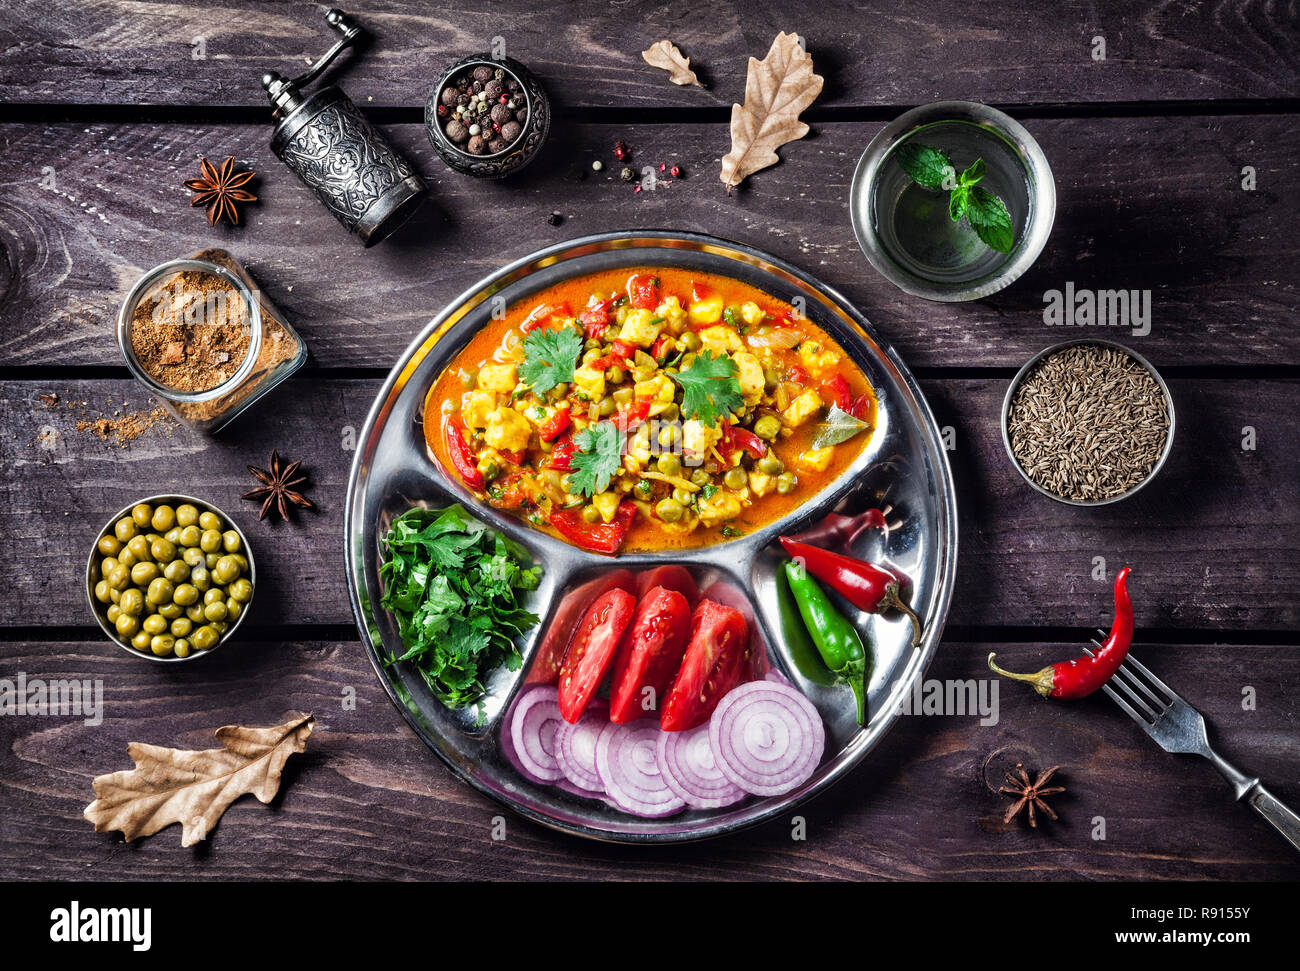 Indian Mutter paneer dish with spices on the wooden background Stock Photo